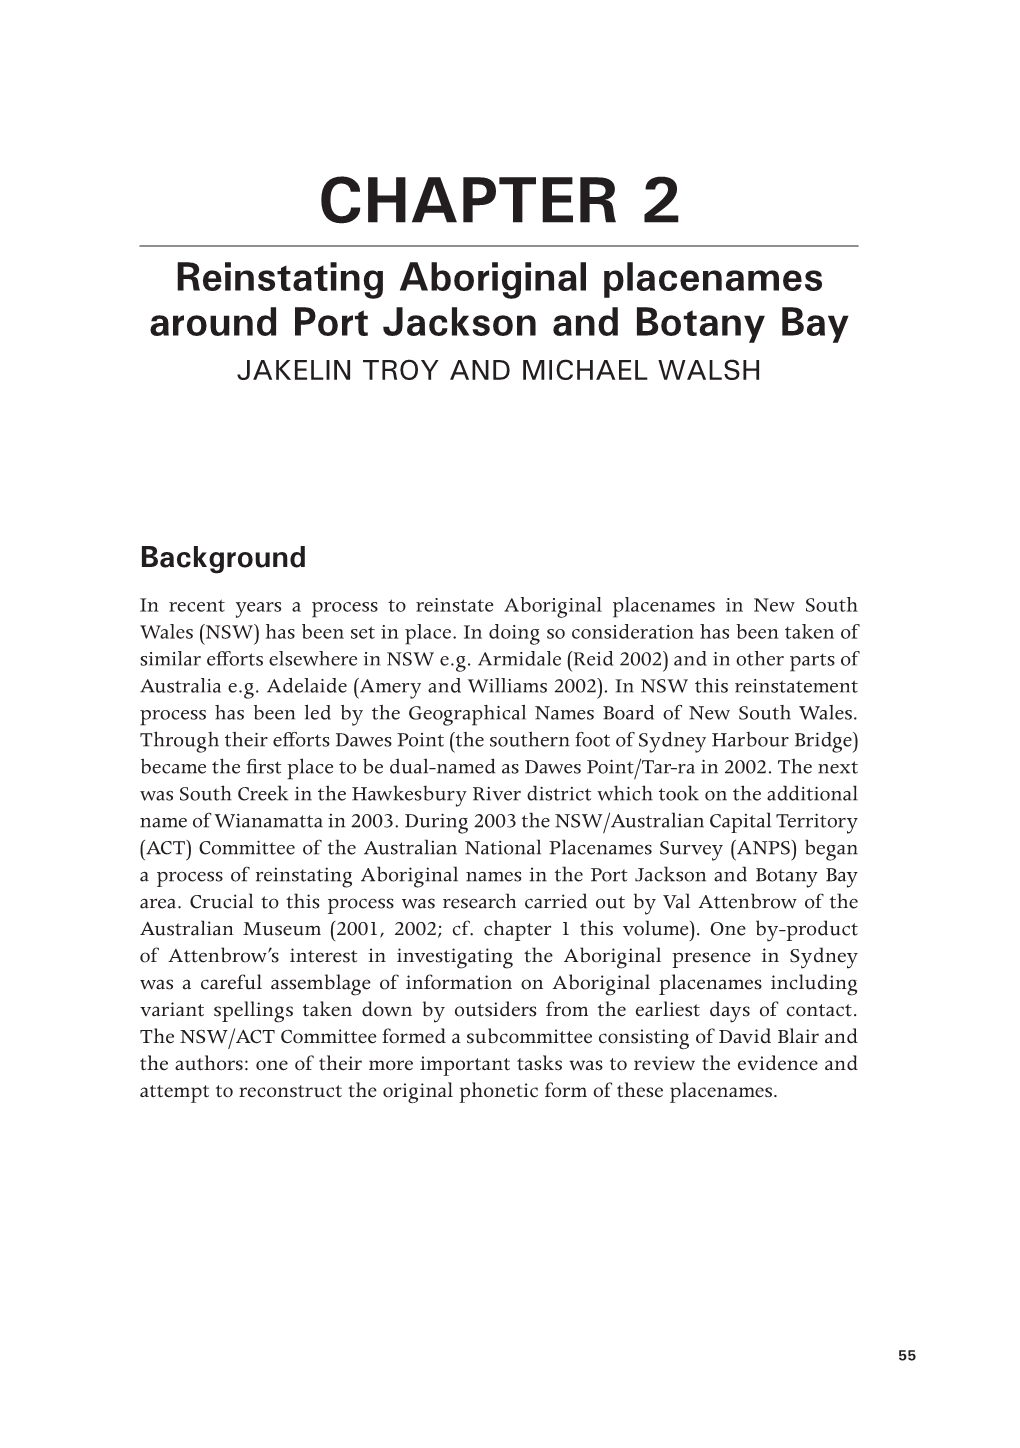 CHAPTER 2 Reinstating Aboriginal Placenames Around Port Jackson and Botany Bay JAKELIN TROY and MICHAEL WALSH